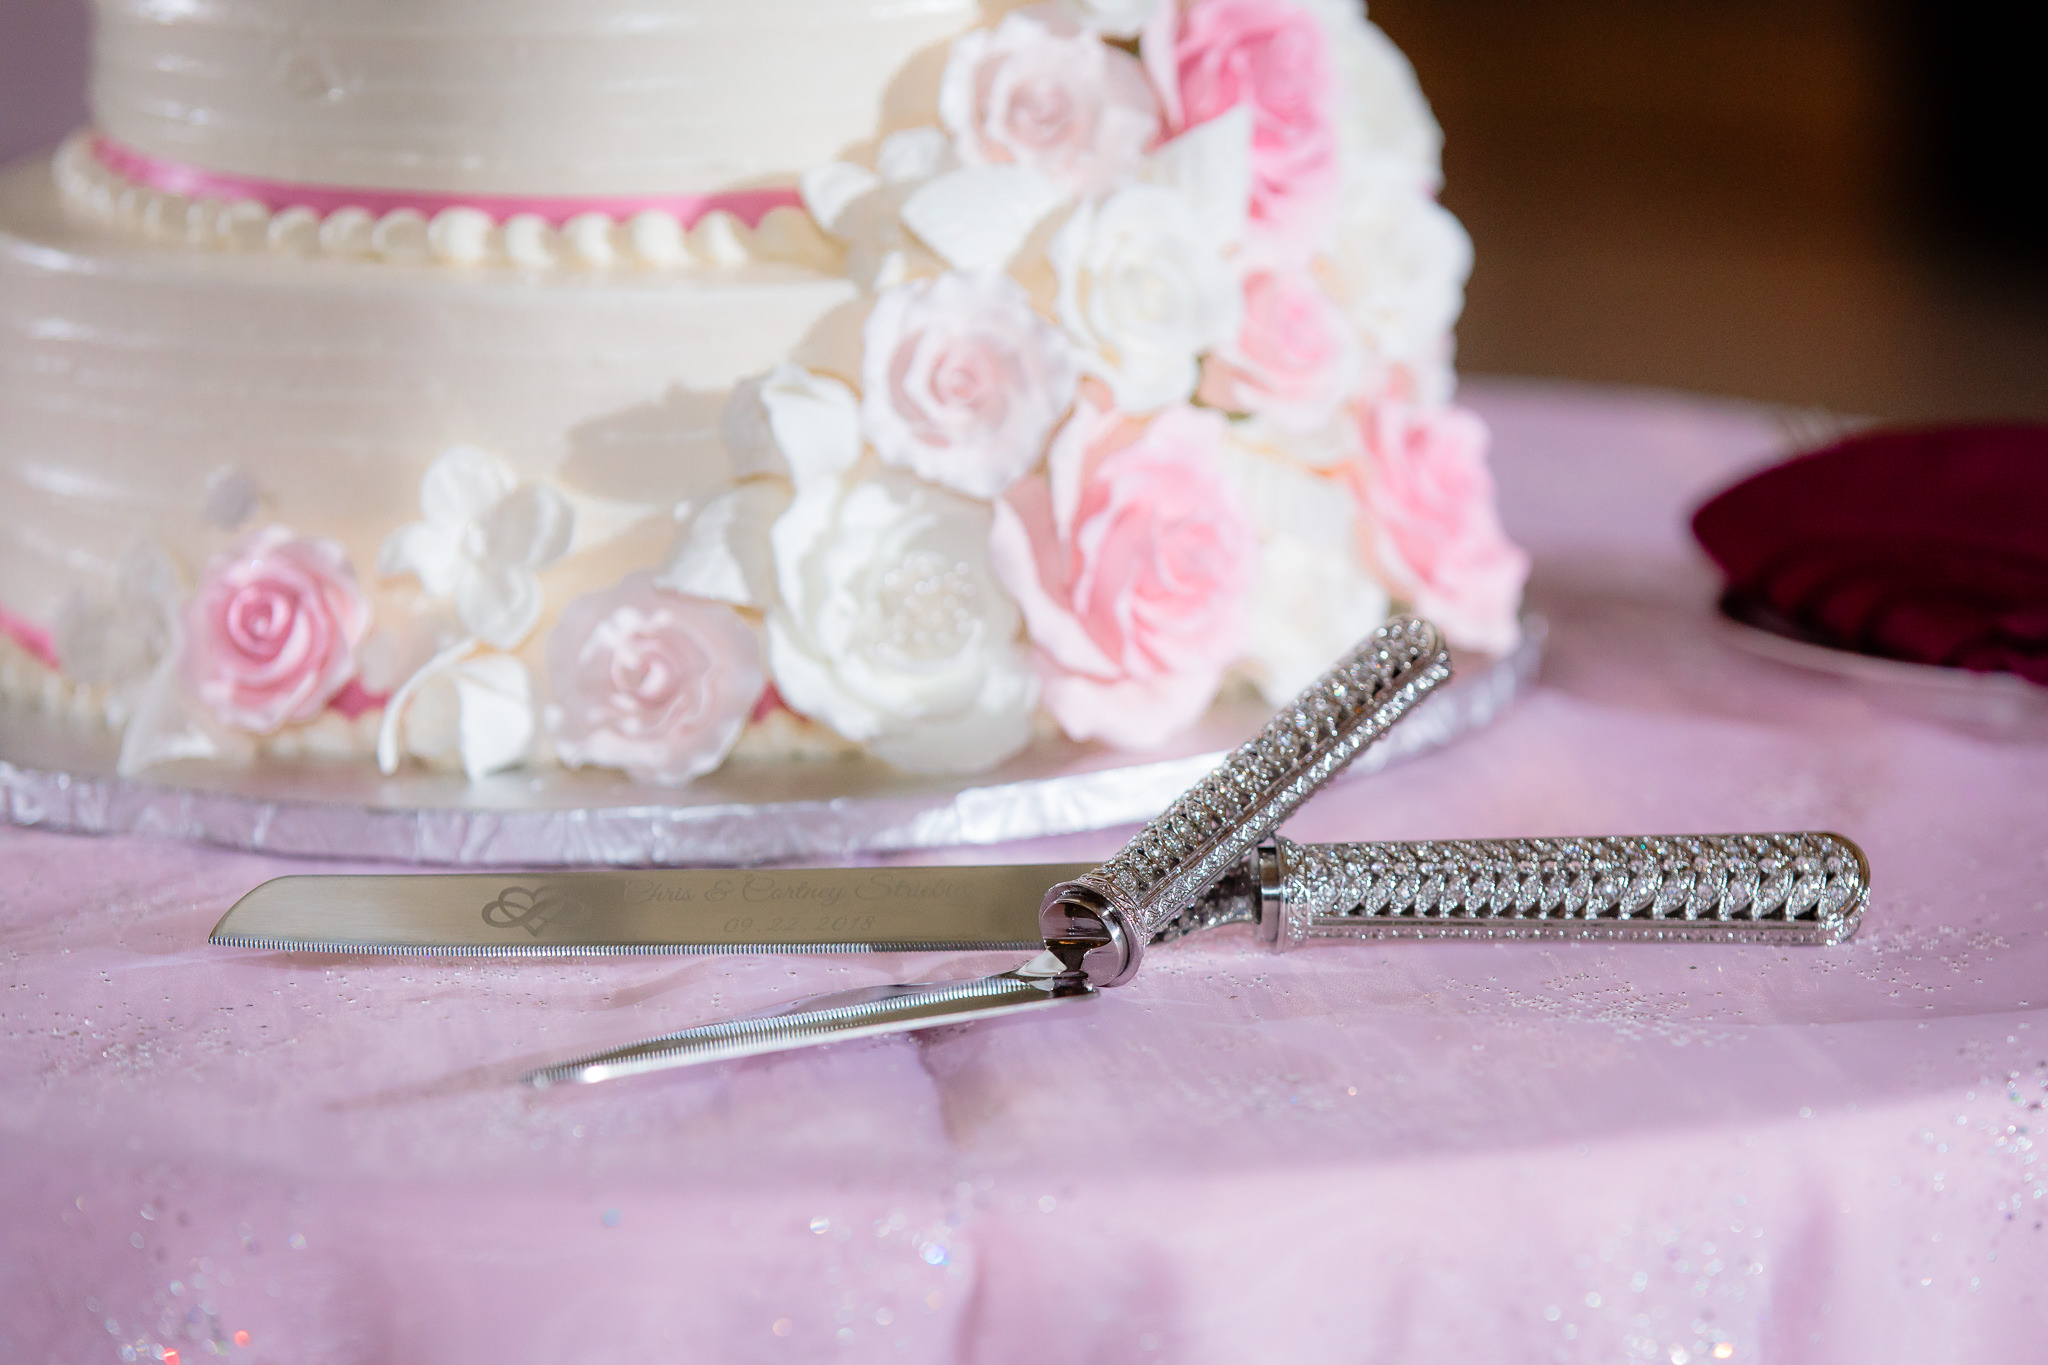 Jeweled cake knife and pink and white cake done by Rania's Catering at the Pennsylvanian